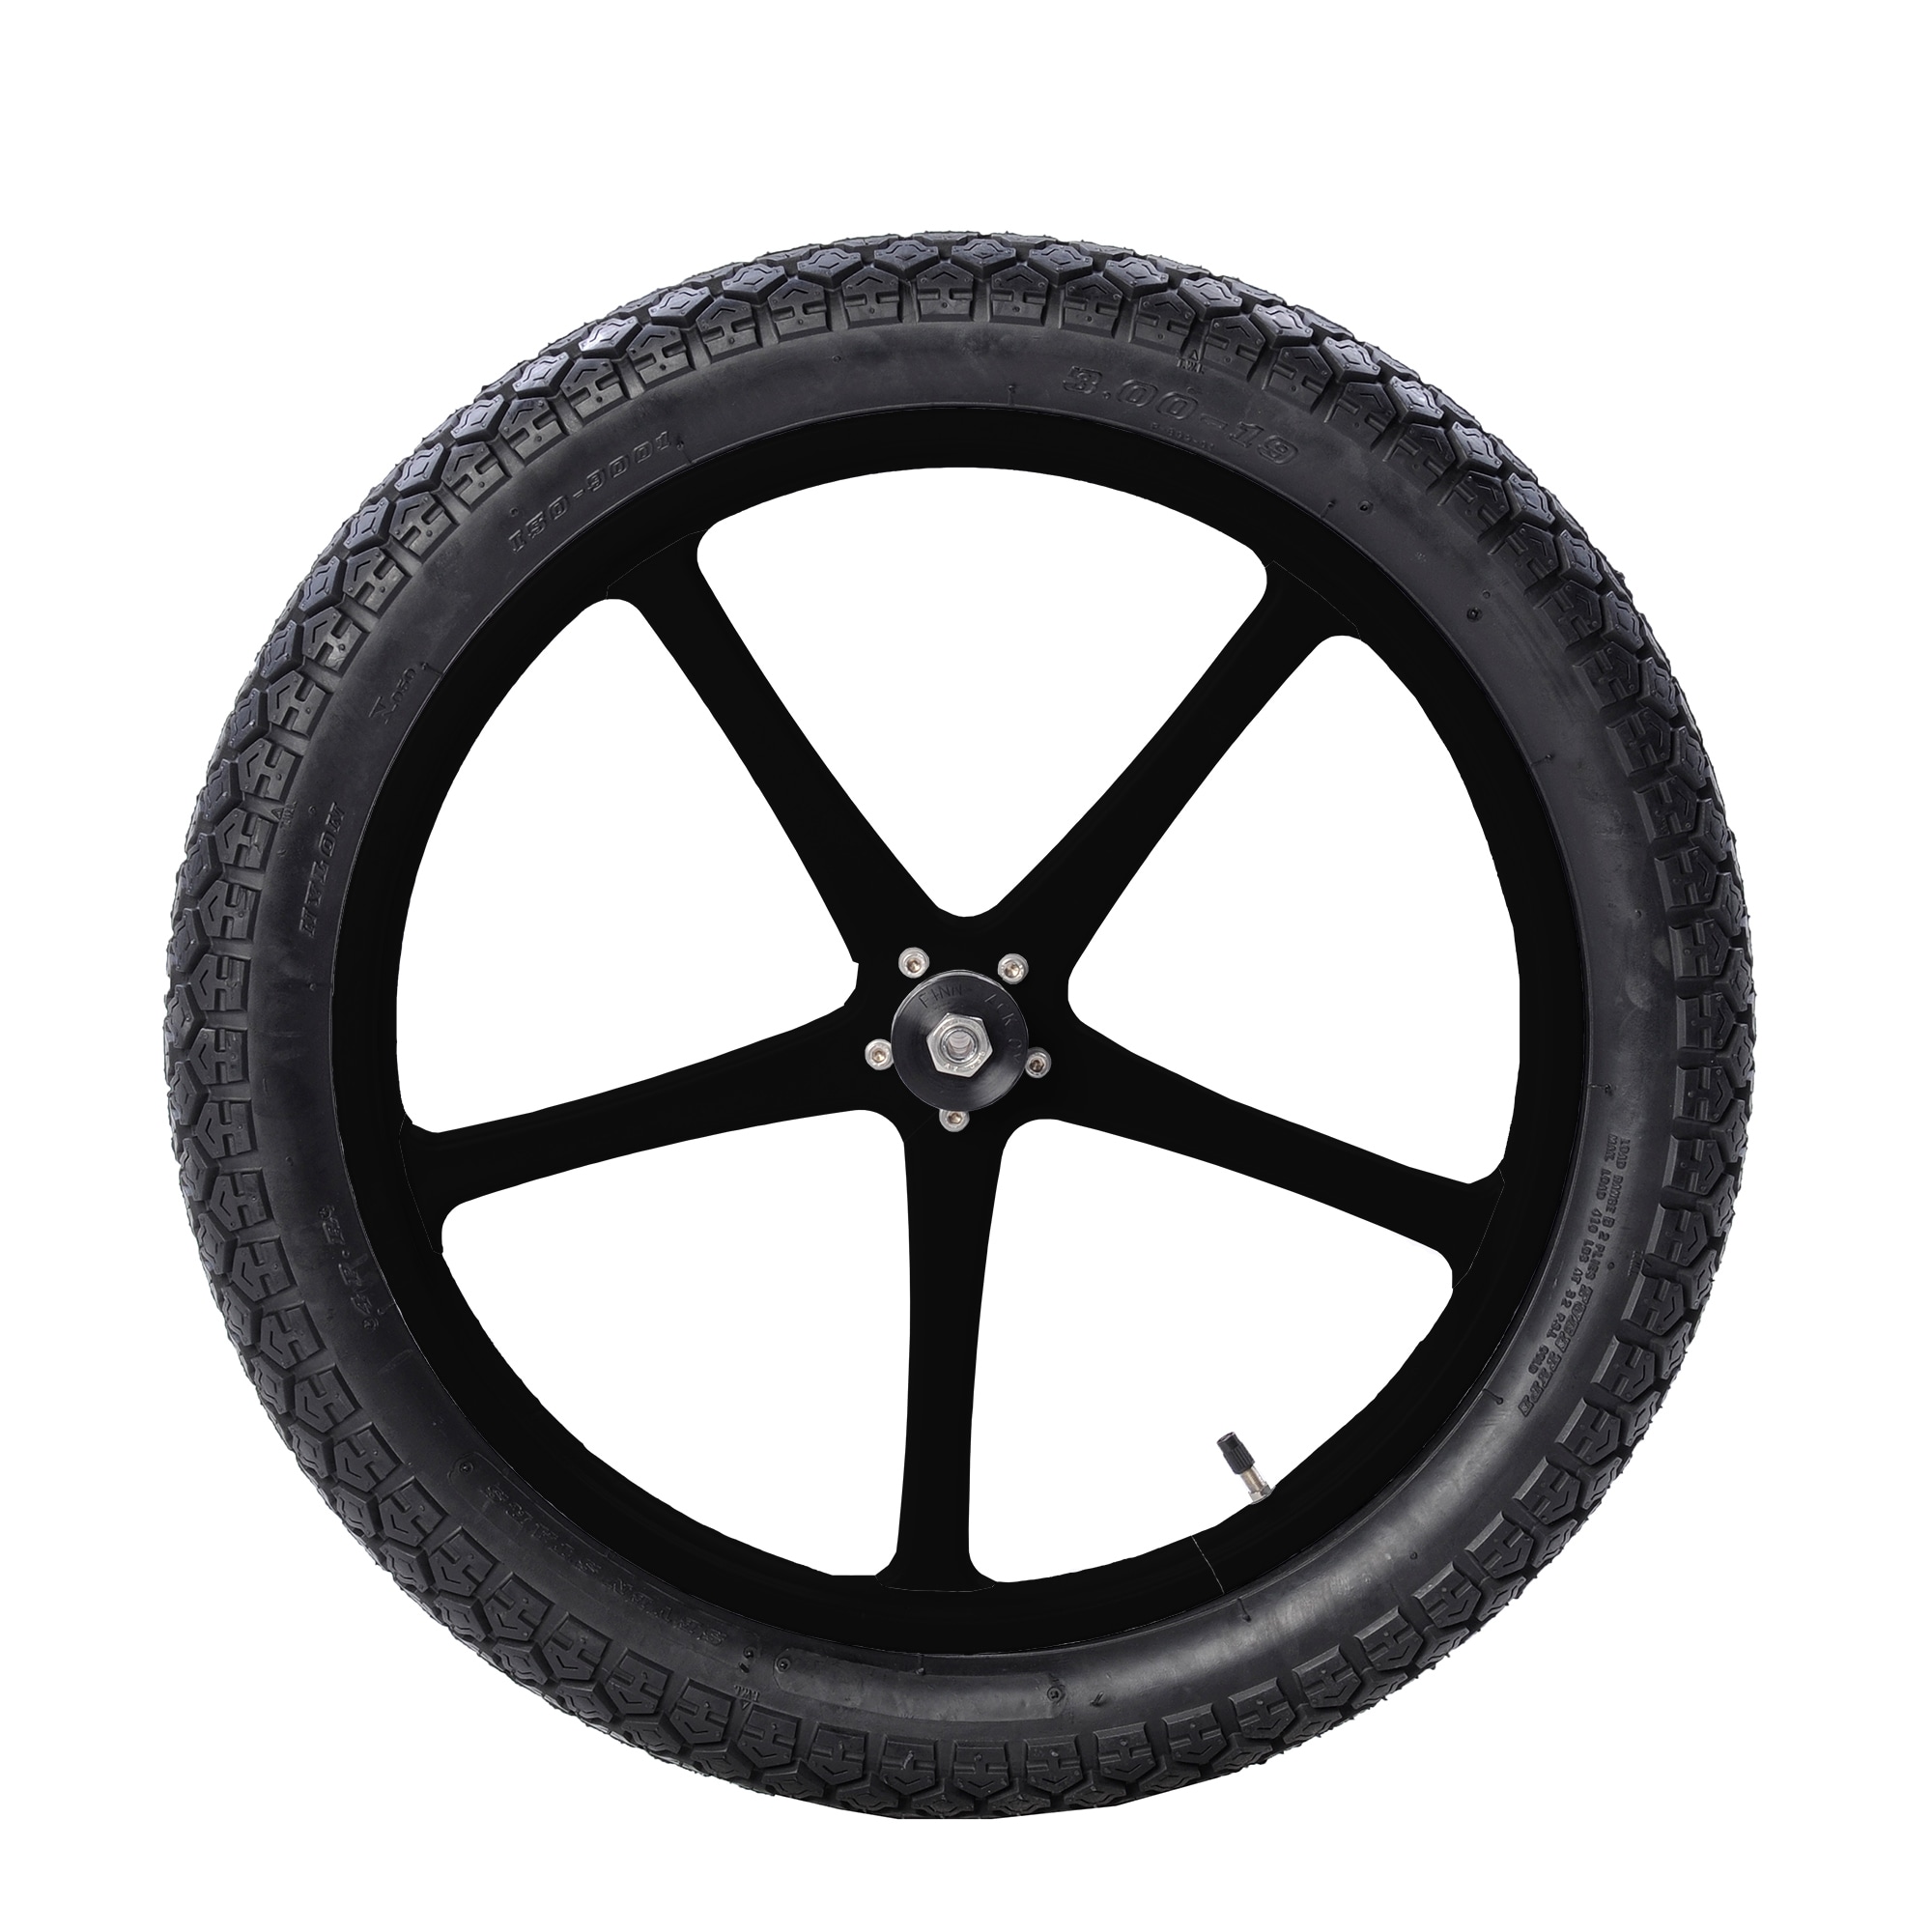 Finntack 19"x 3.00 training cart wheel (sold in pairs)